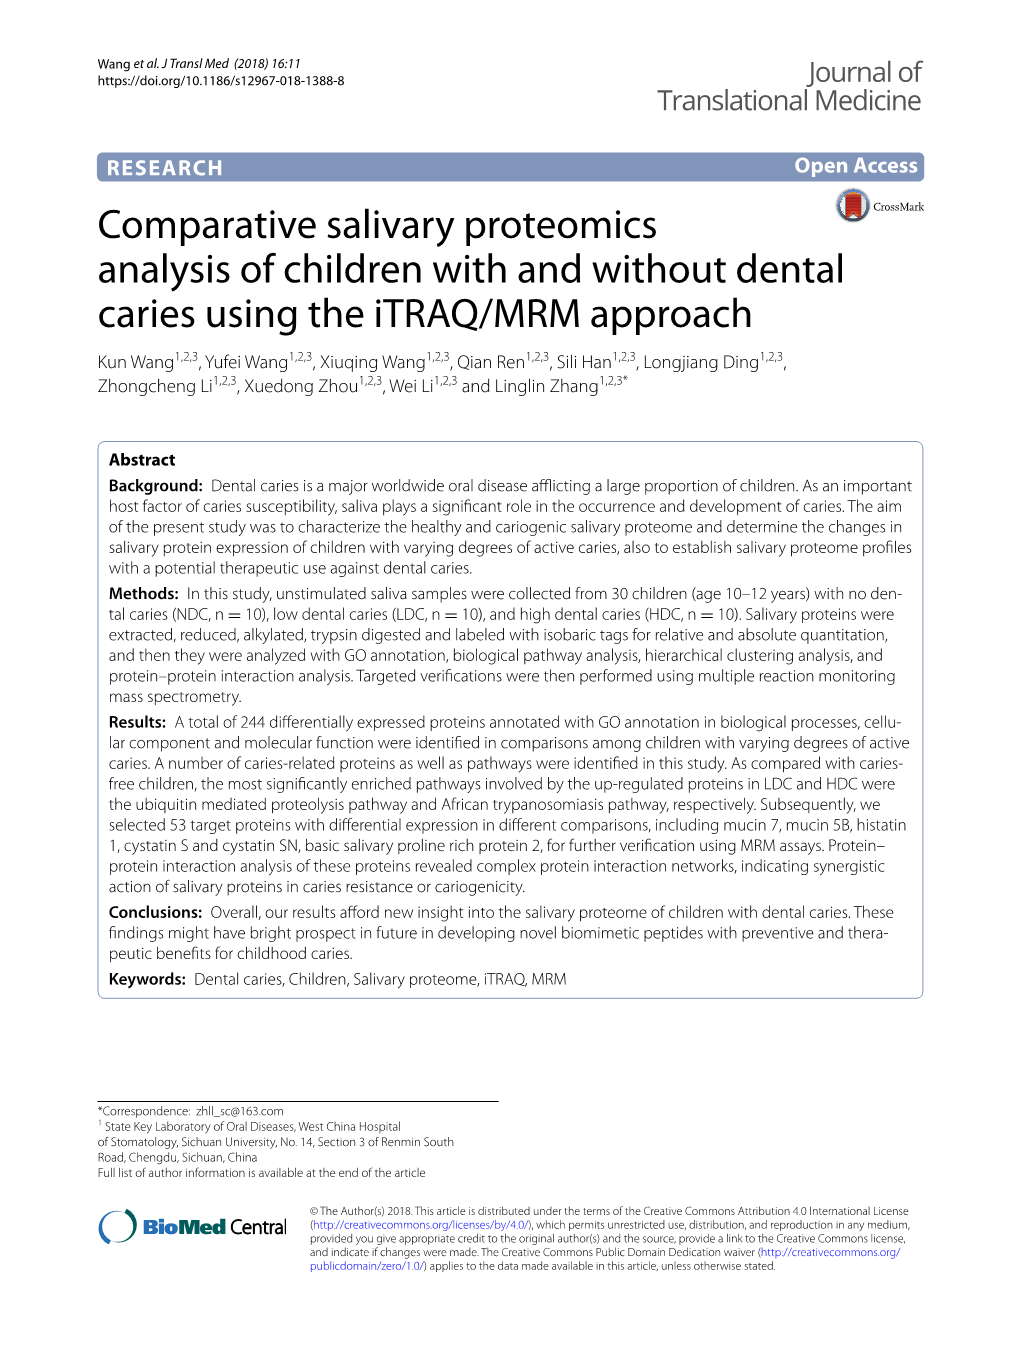 Comparative Salivary Proteomics Analysis of Children with and Without Dental Caries Using the Itraq/MRM Approach